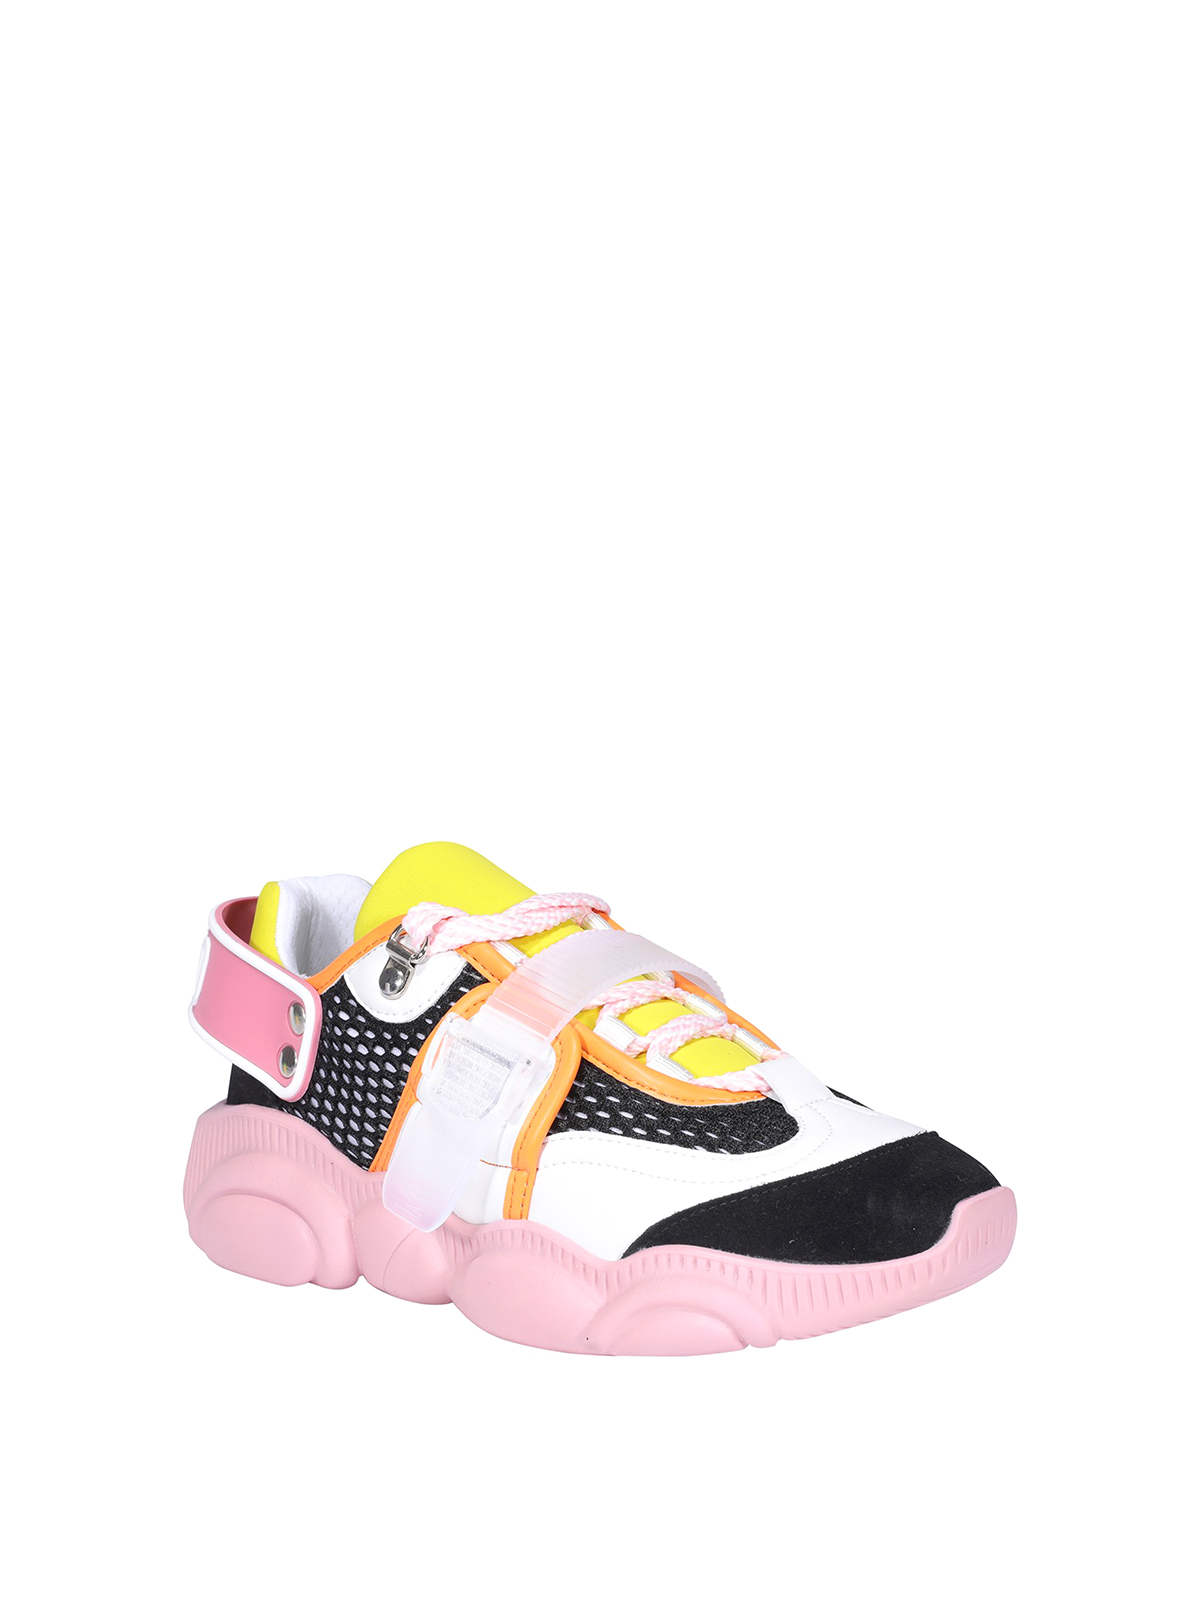 Trainers Moschino - Roller Skates MA15133G1CMS600B